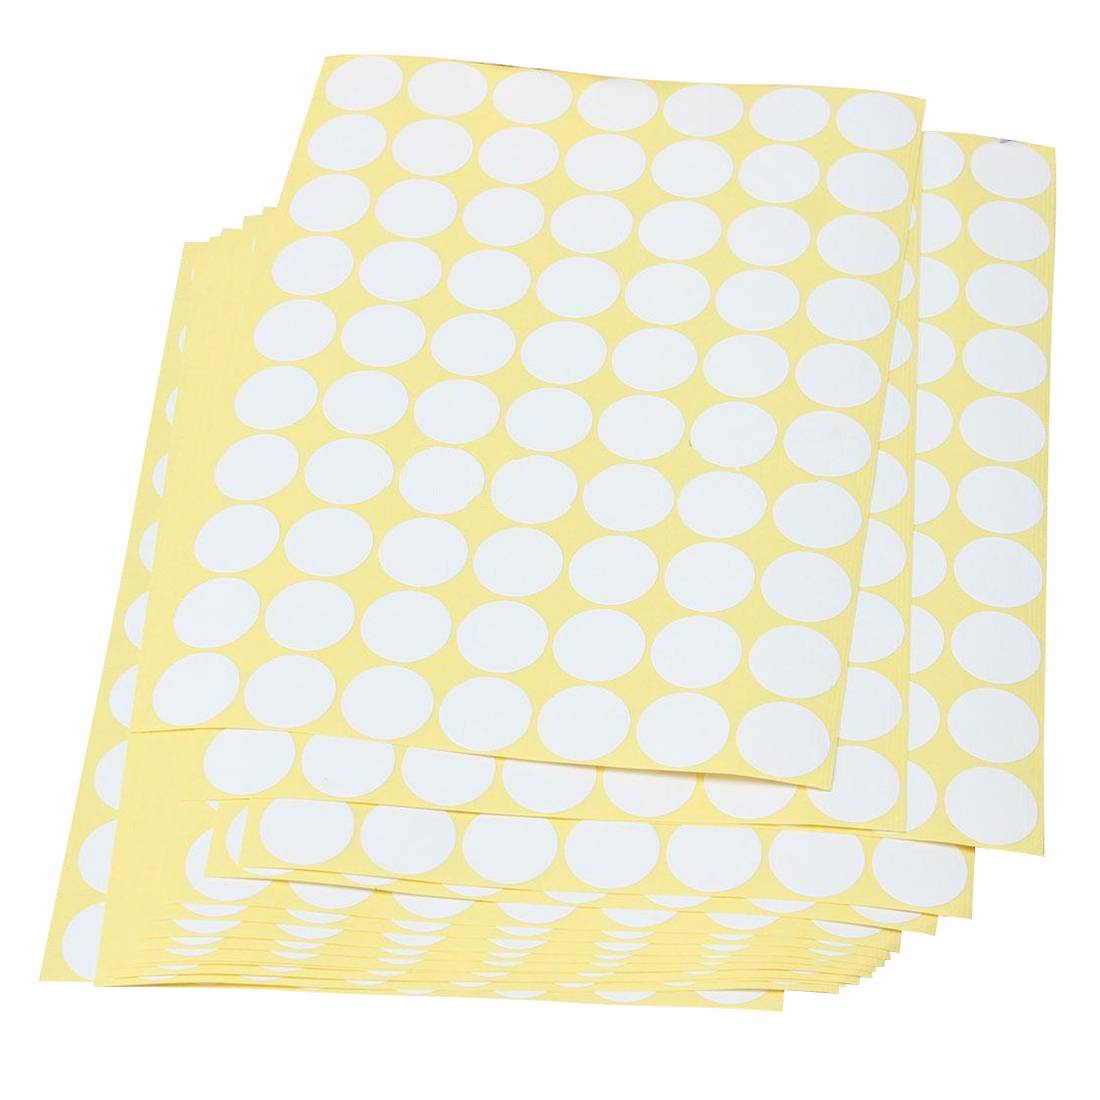 BLEL-Hot-19mm-Circles-Round-Code-Stickers-Self-Adhesive-Sticky-Labels-White